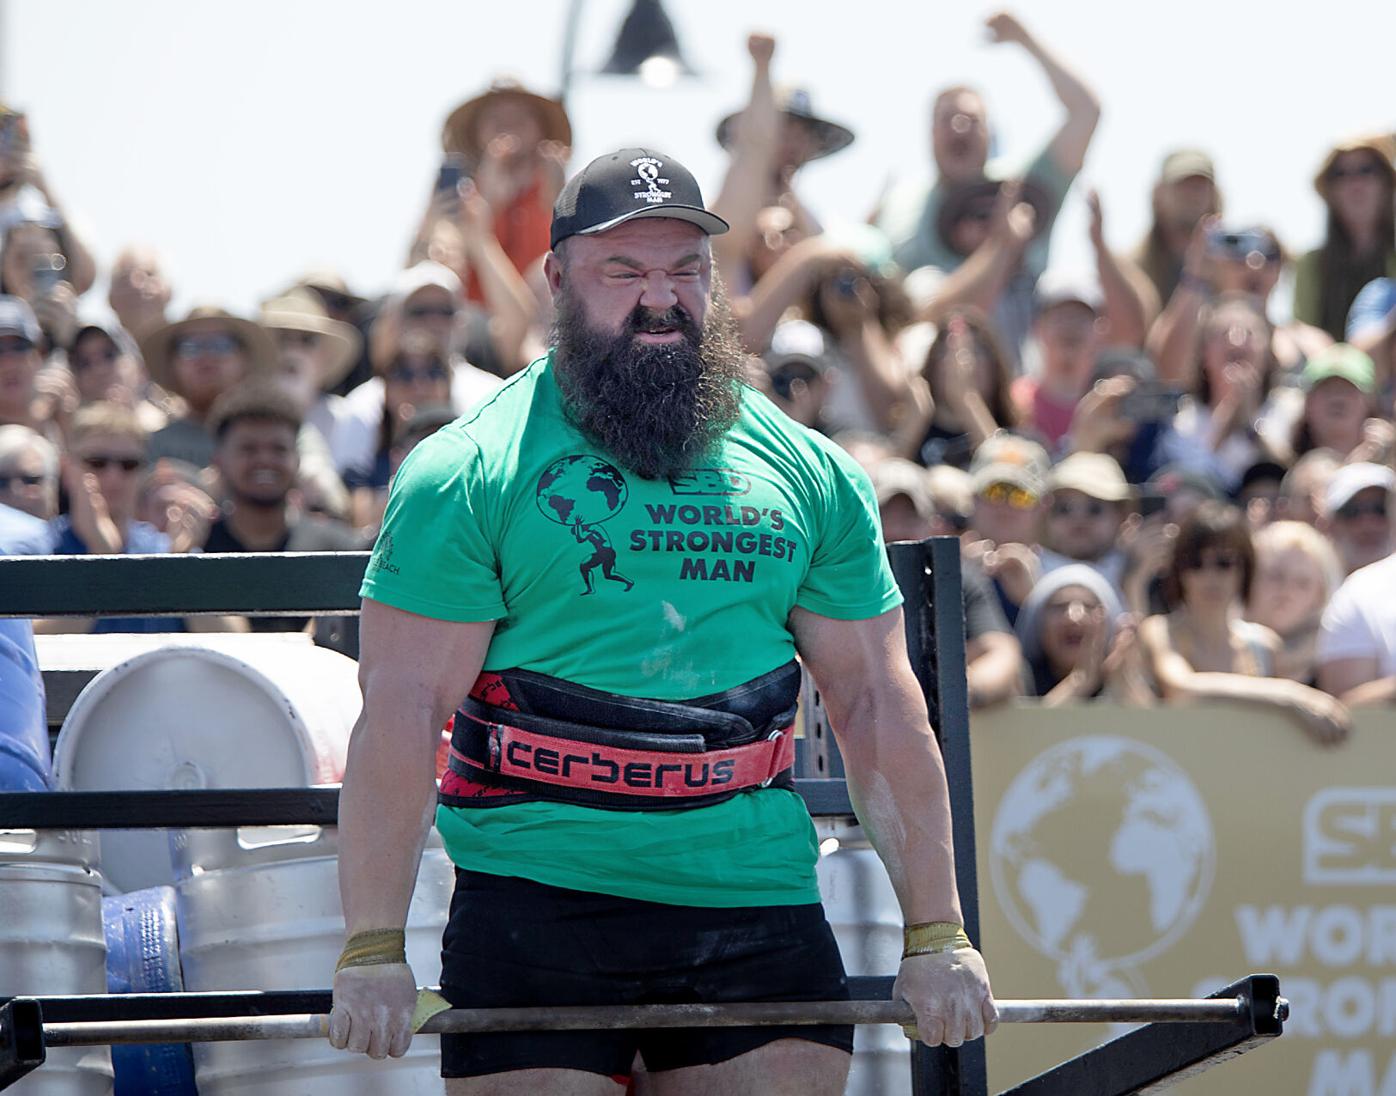 World's Strongest Man competition in Myrtle Beach, News